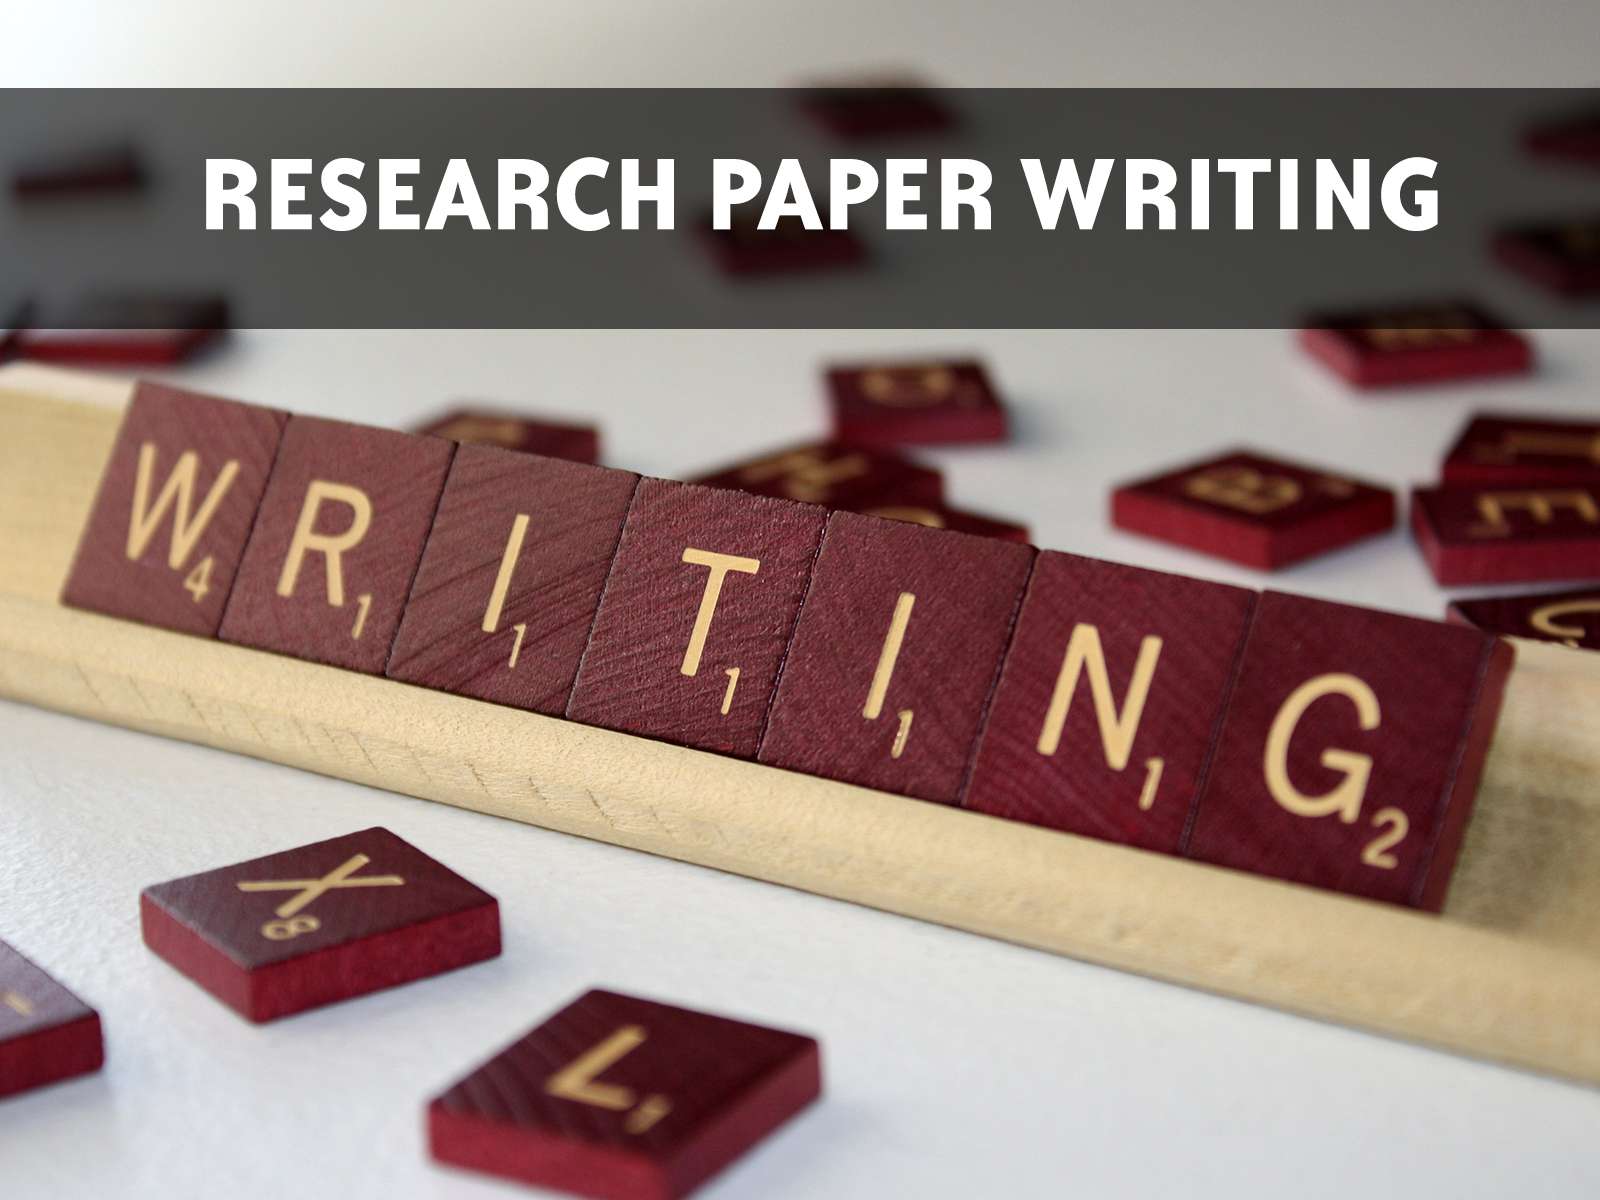 research writing course